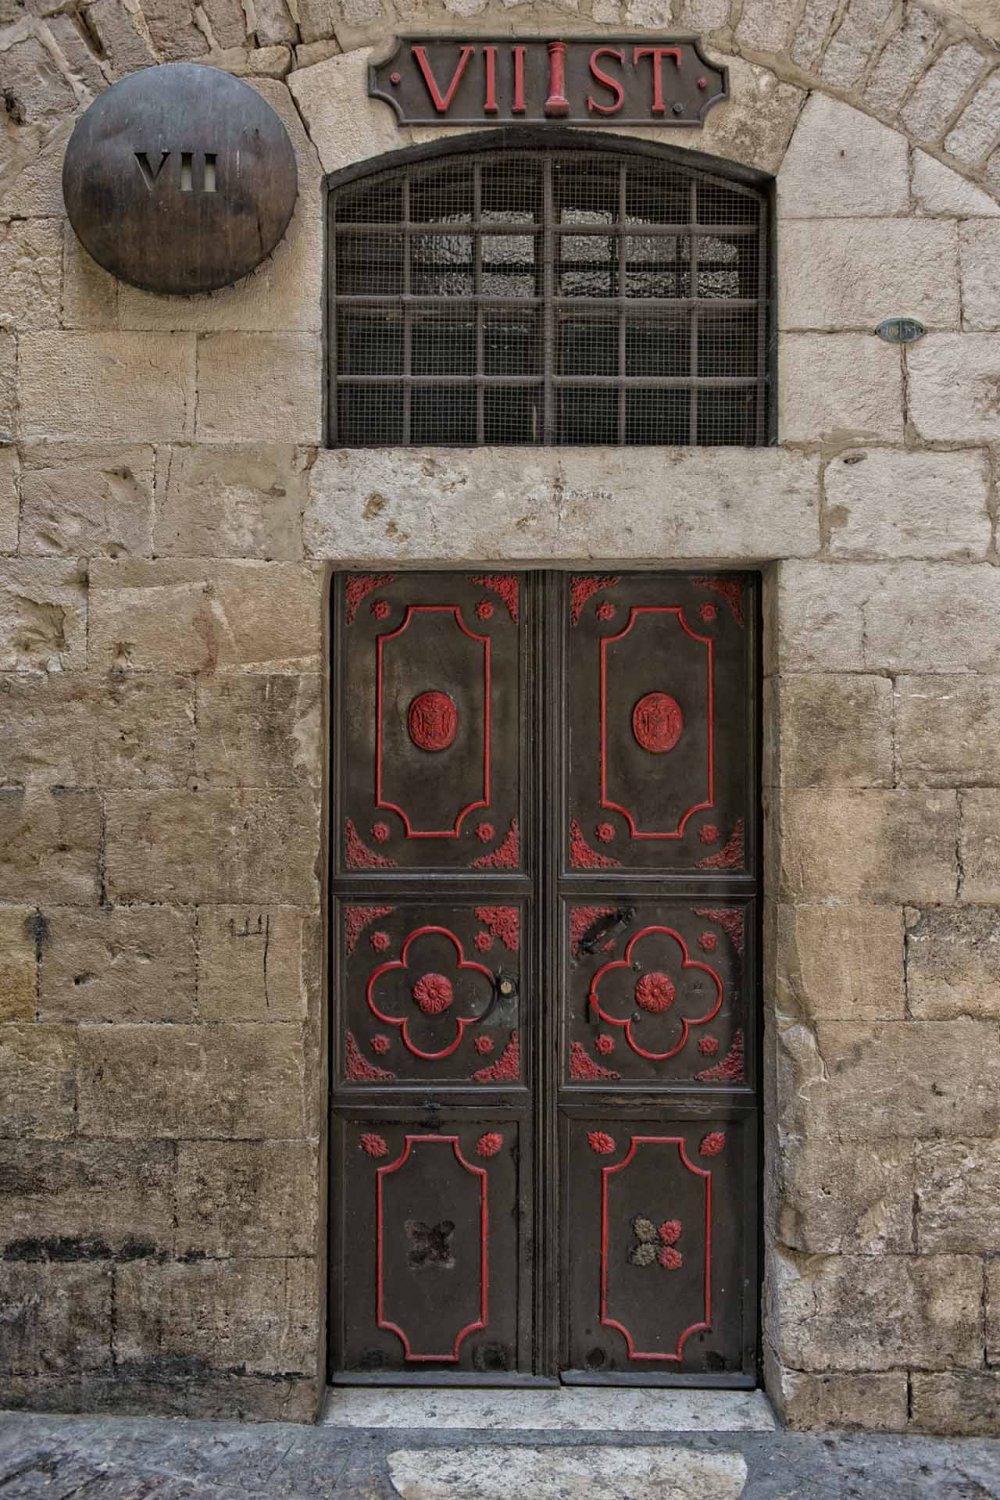 The Seventh Station of the Cross on the Via Dolorosa in Jerusalem’s Old City